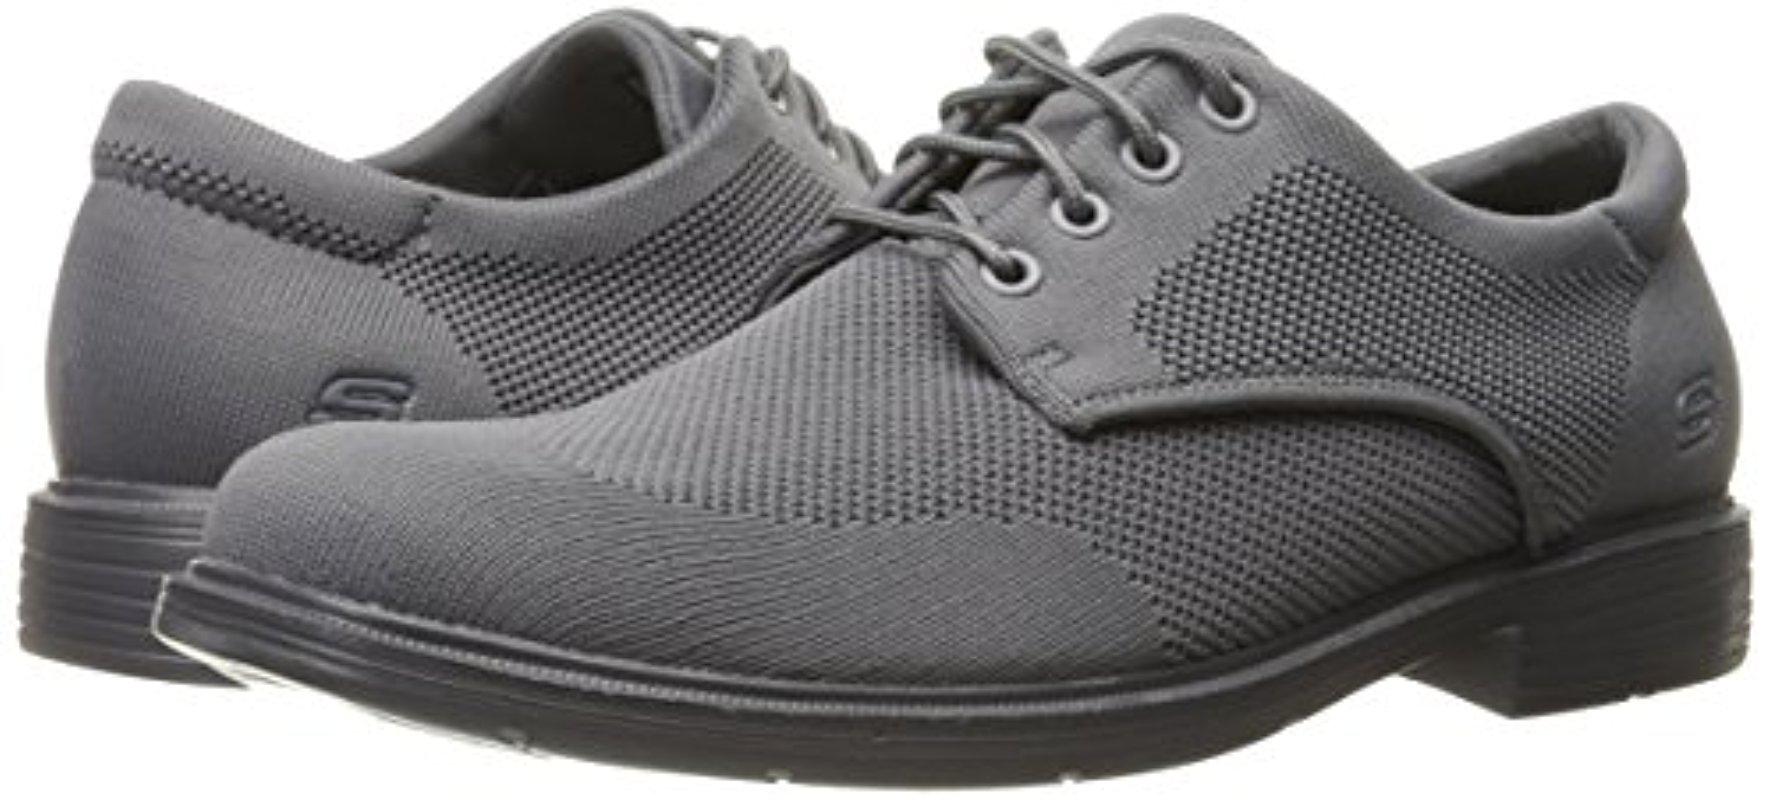 Skechers Caswell Aleno Oxford in Grey 